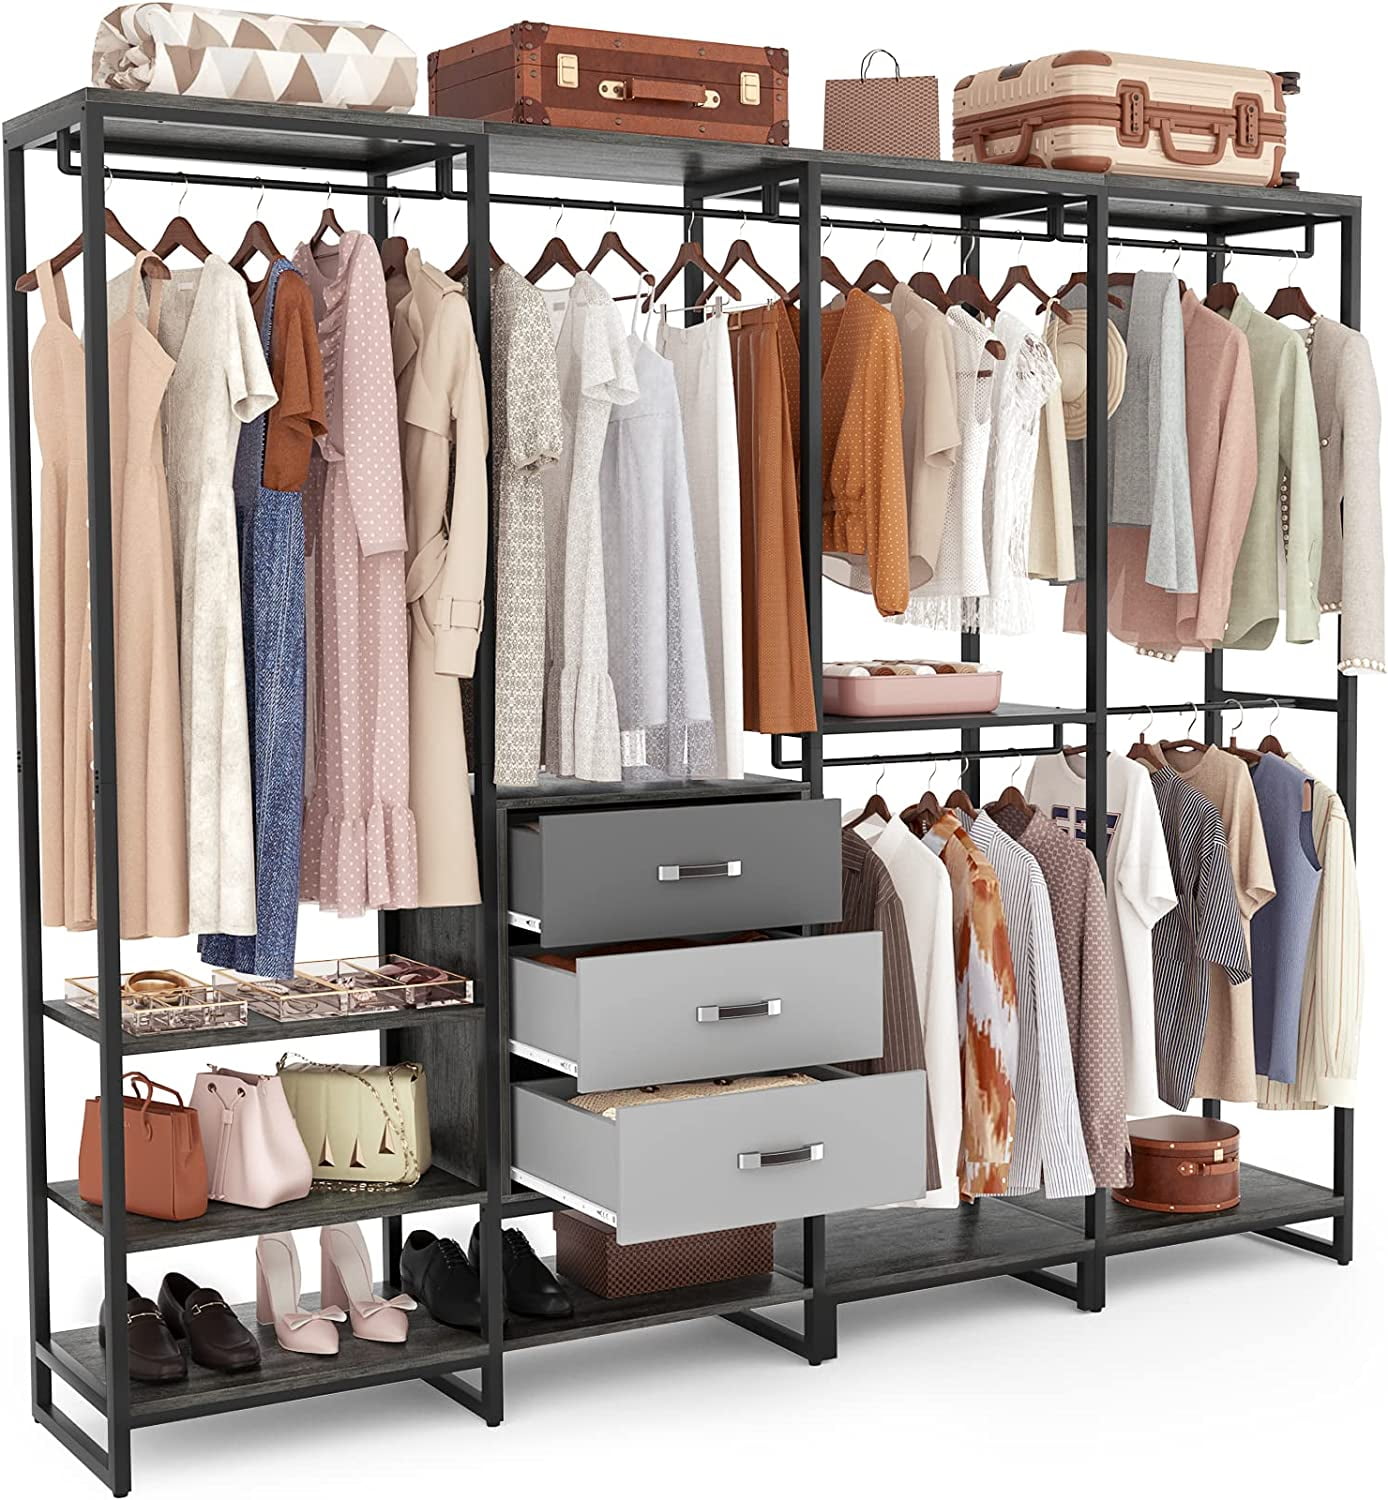  Homykic Large Bamboo Closet System Clothes Rack, Freestanding  Garment Rakc with 5 Hanging Rods, 7 Open Shelves, 70”W x 77”H x 18 D,  Lightweight, Easy Assembly, Espresso : Home & Kitchen